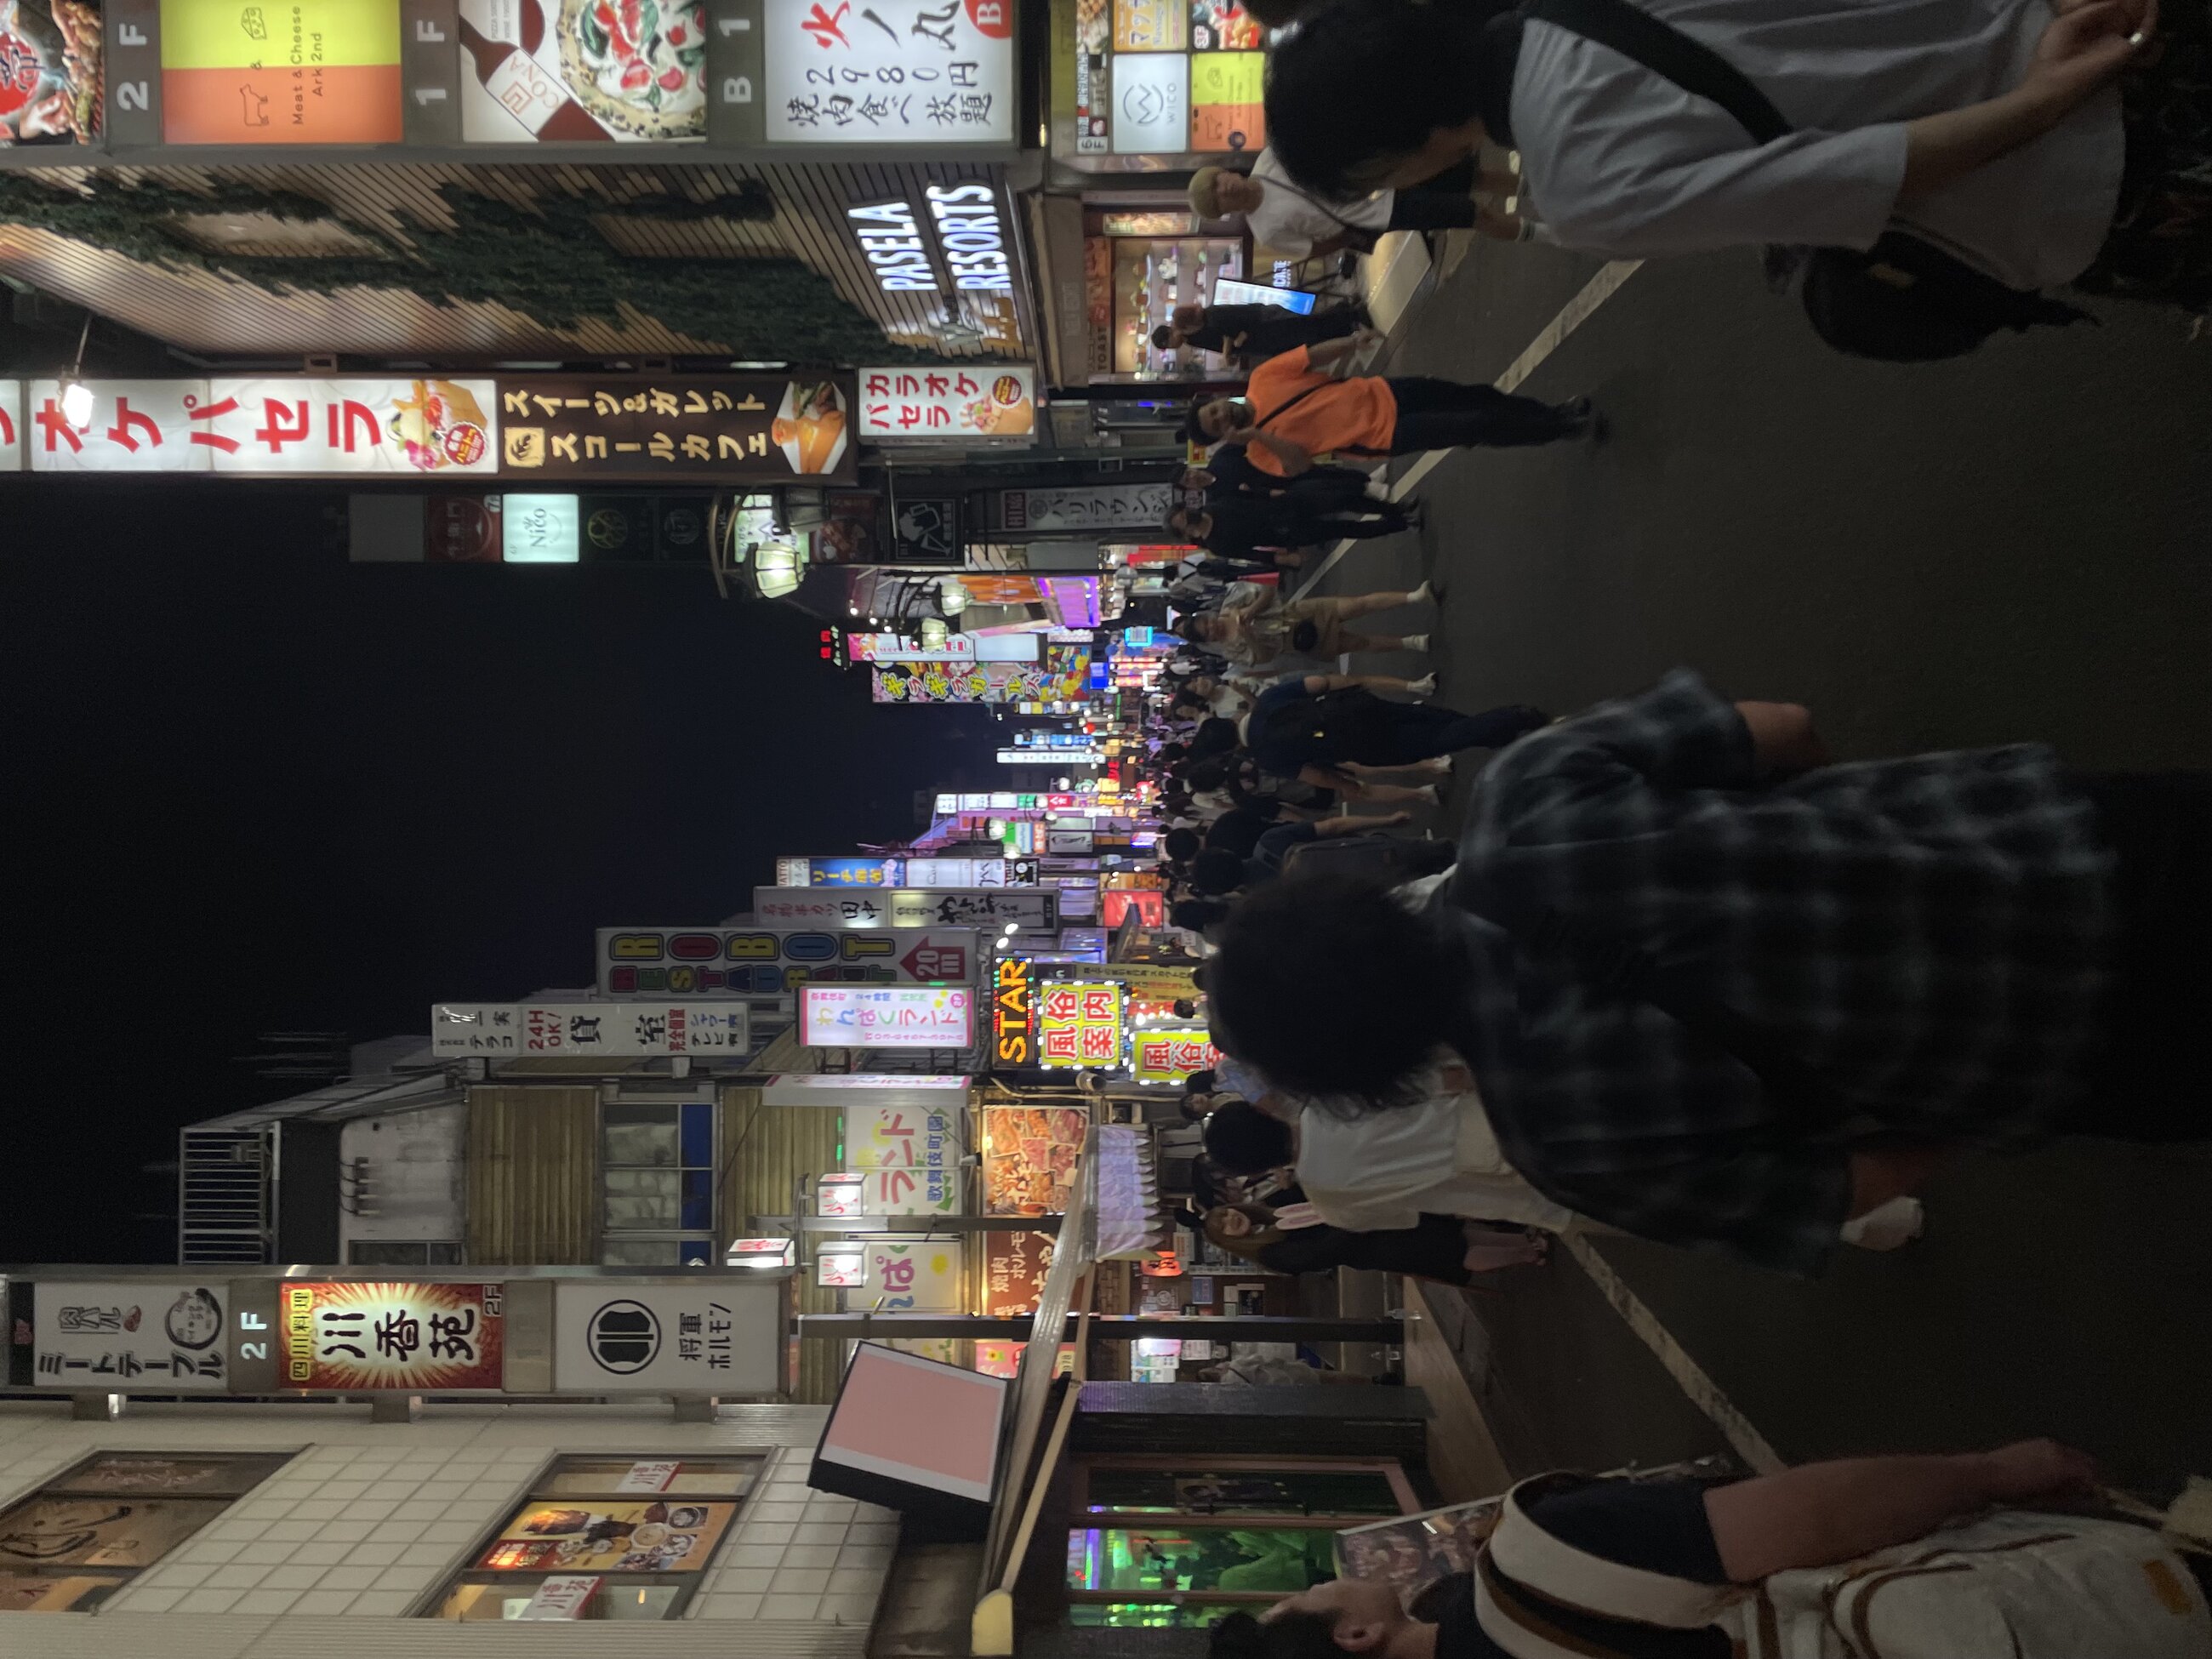 This was in Shinjuku at around 10:00pm(22:00) and it is one of my favorite memories of Japan because it reminds me of when me and my friends were walking down the street being amazed by the neon signs but I also remember laughing all the way down this street with my friends from other countries when we were telling stories